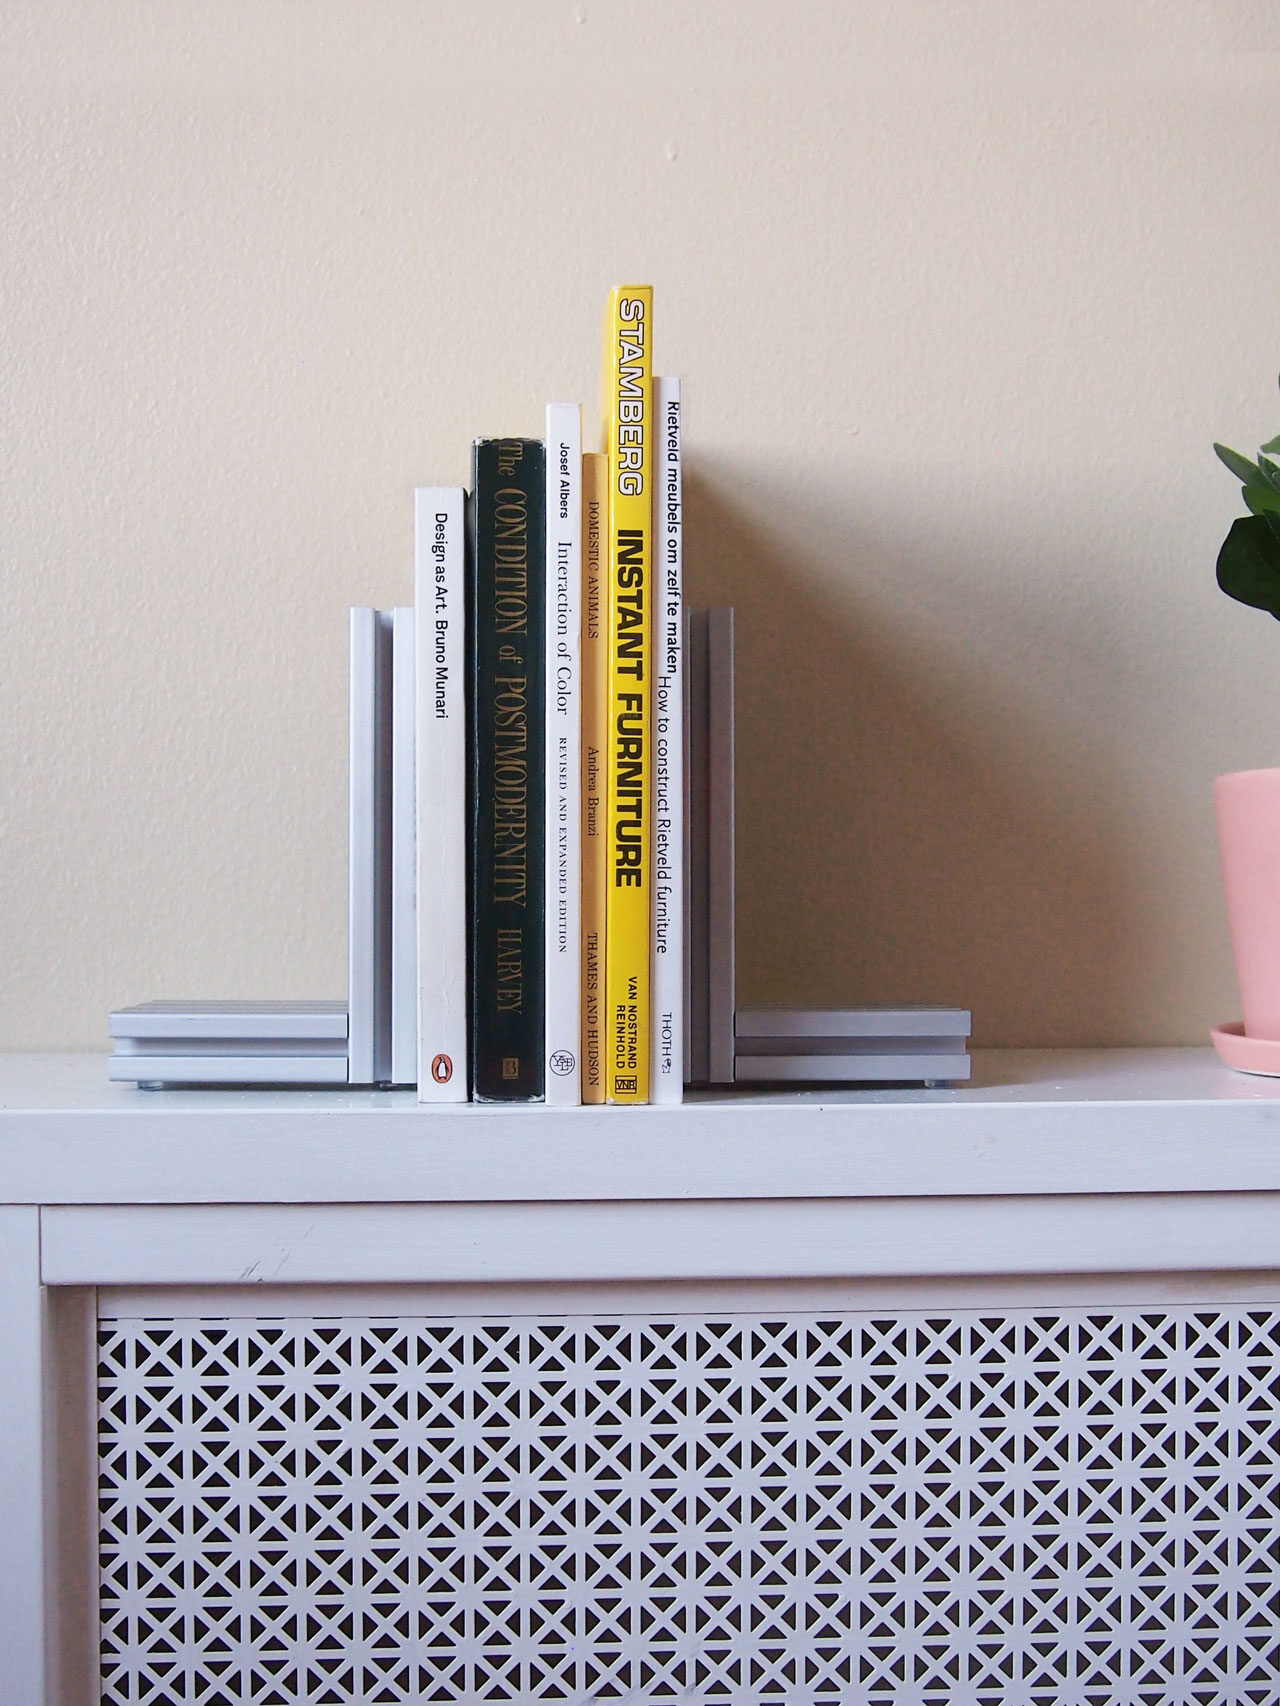 DIY extrusion bookends designed by Aandersson